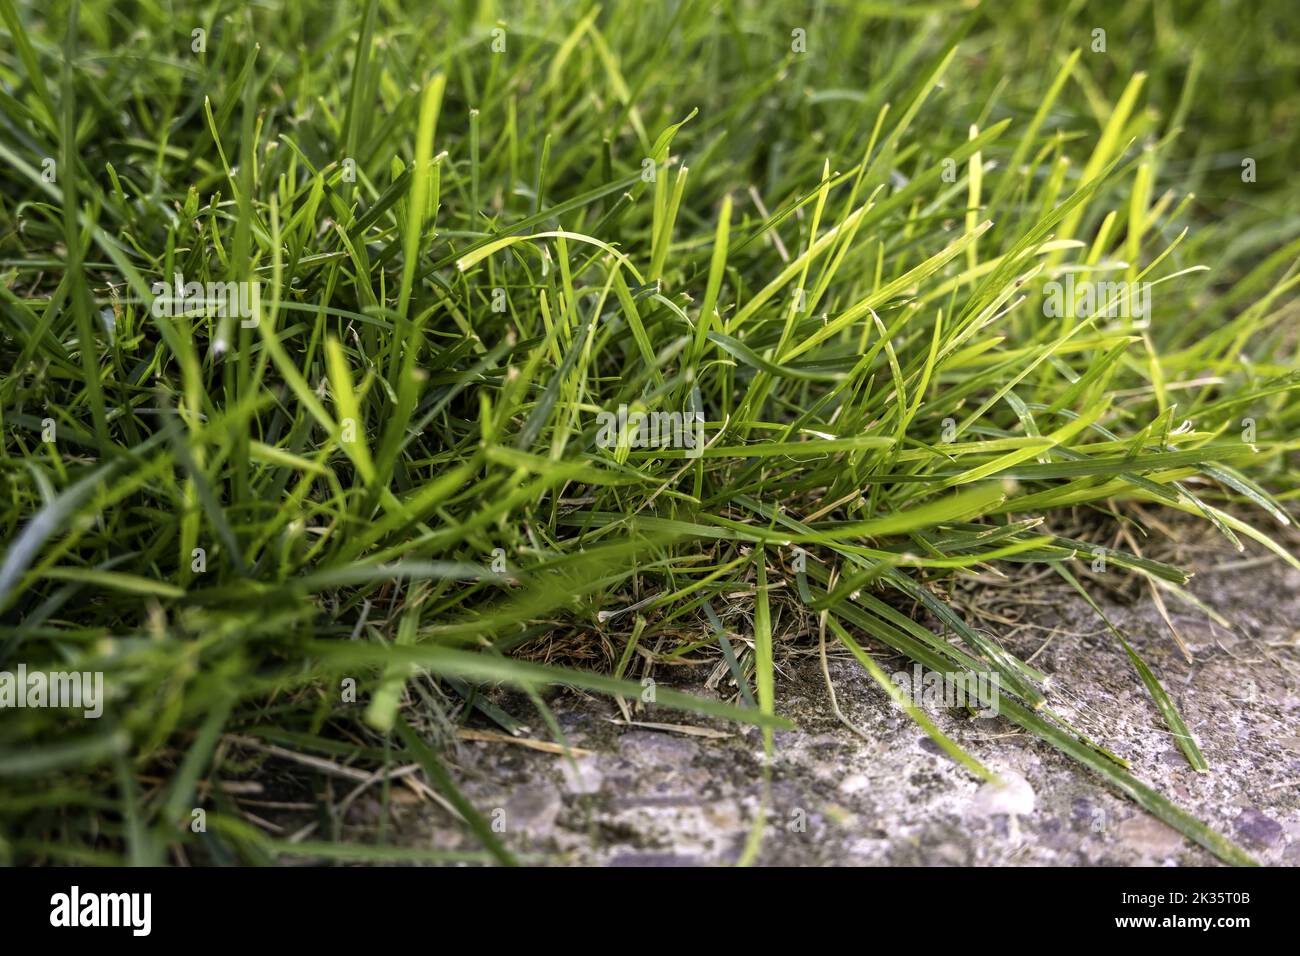 Detail of lawn in a garden, decoration with plants Stock Photo